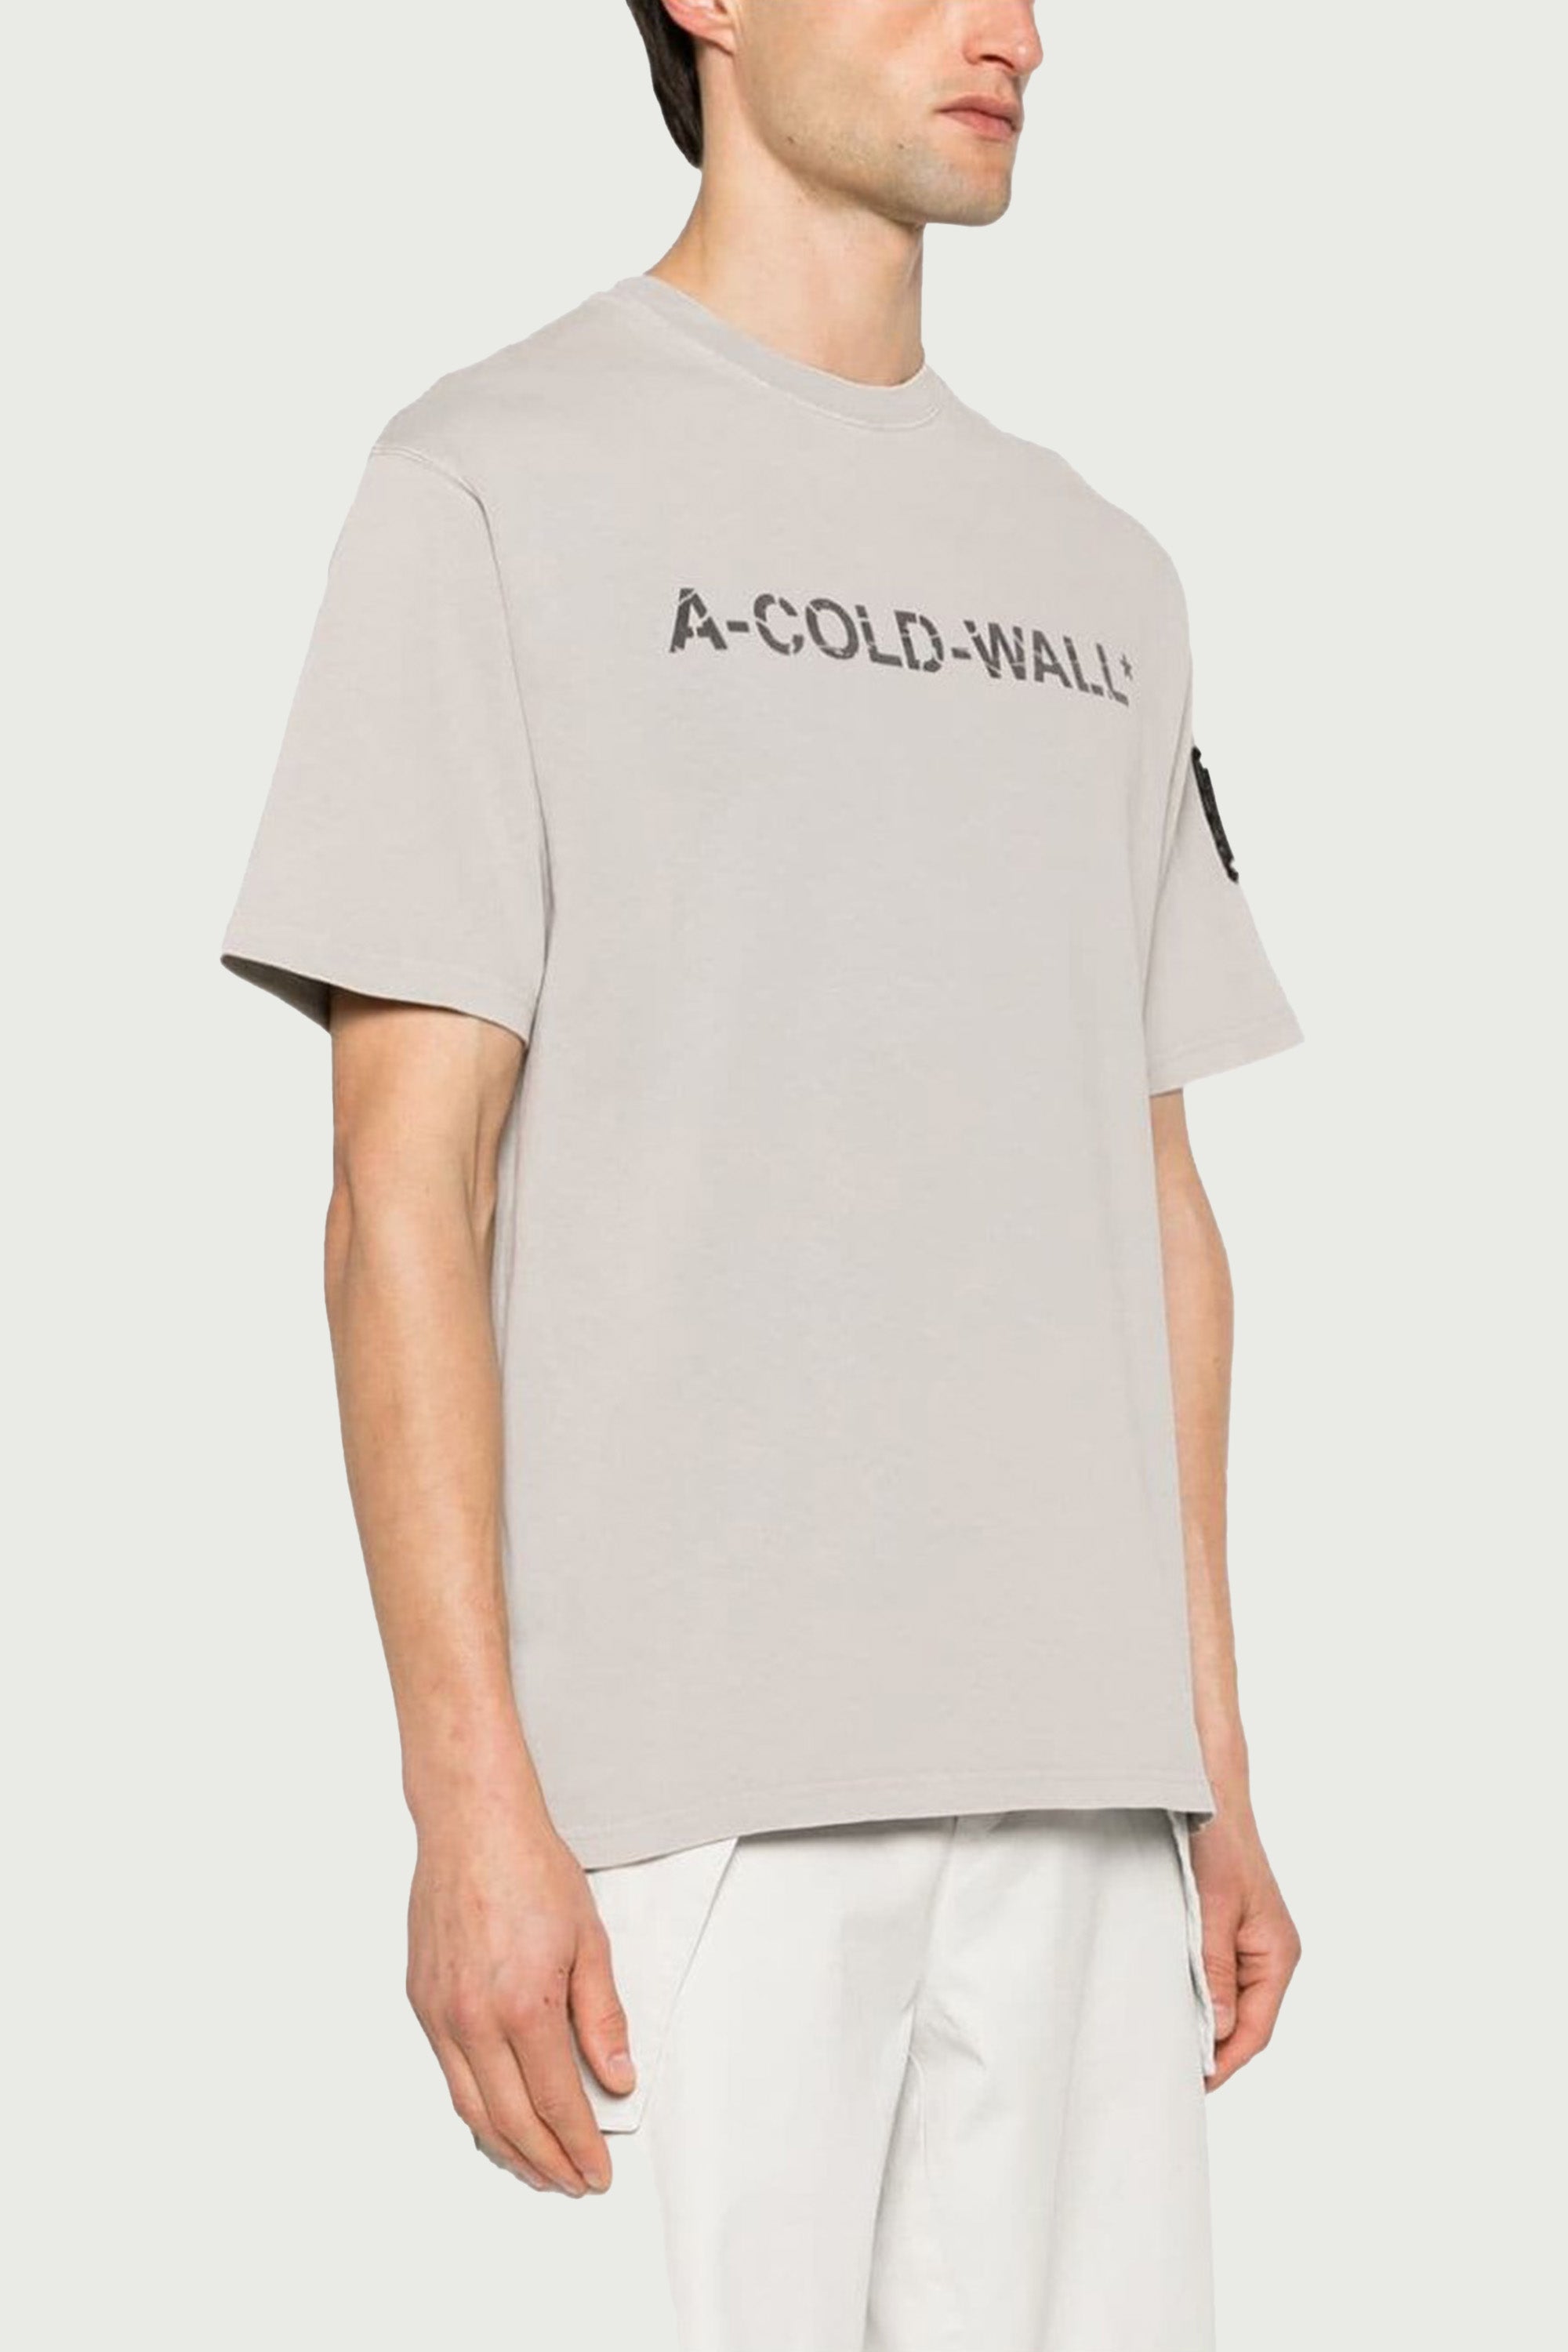 A-COLD-WALL* Projection Shirt in White